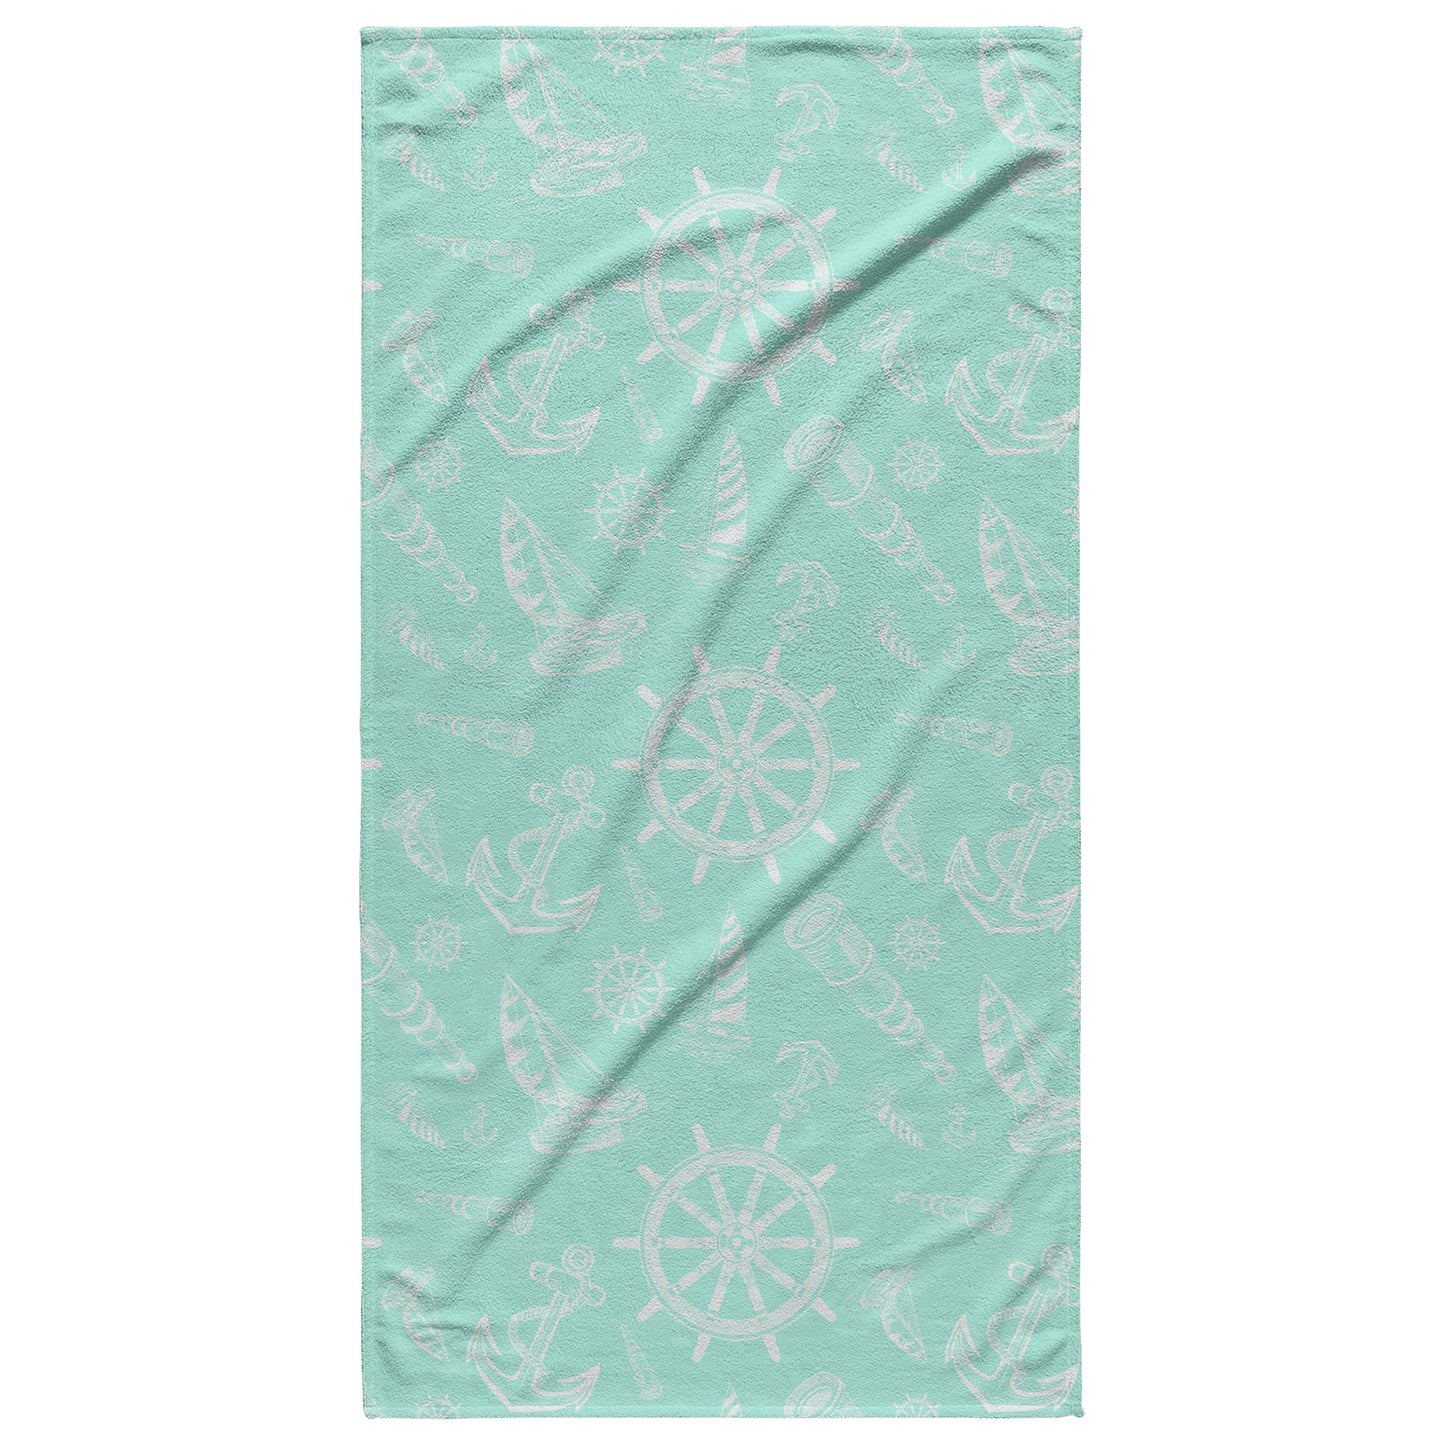 Nautical Sketches on Mint Background, Beach Towel